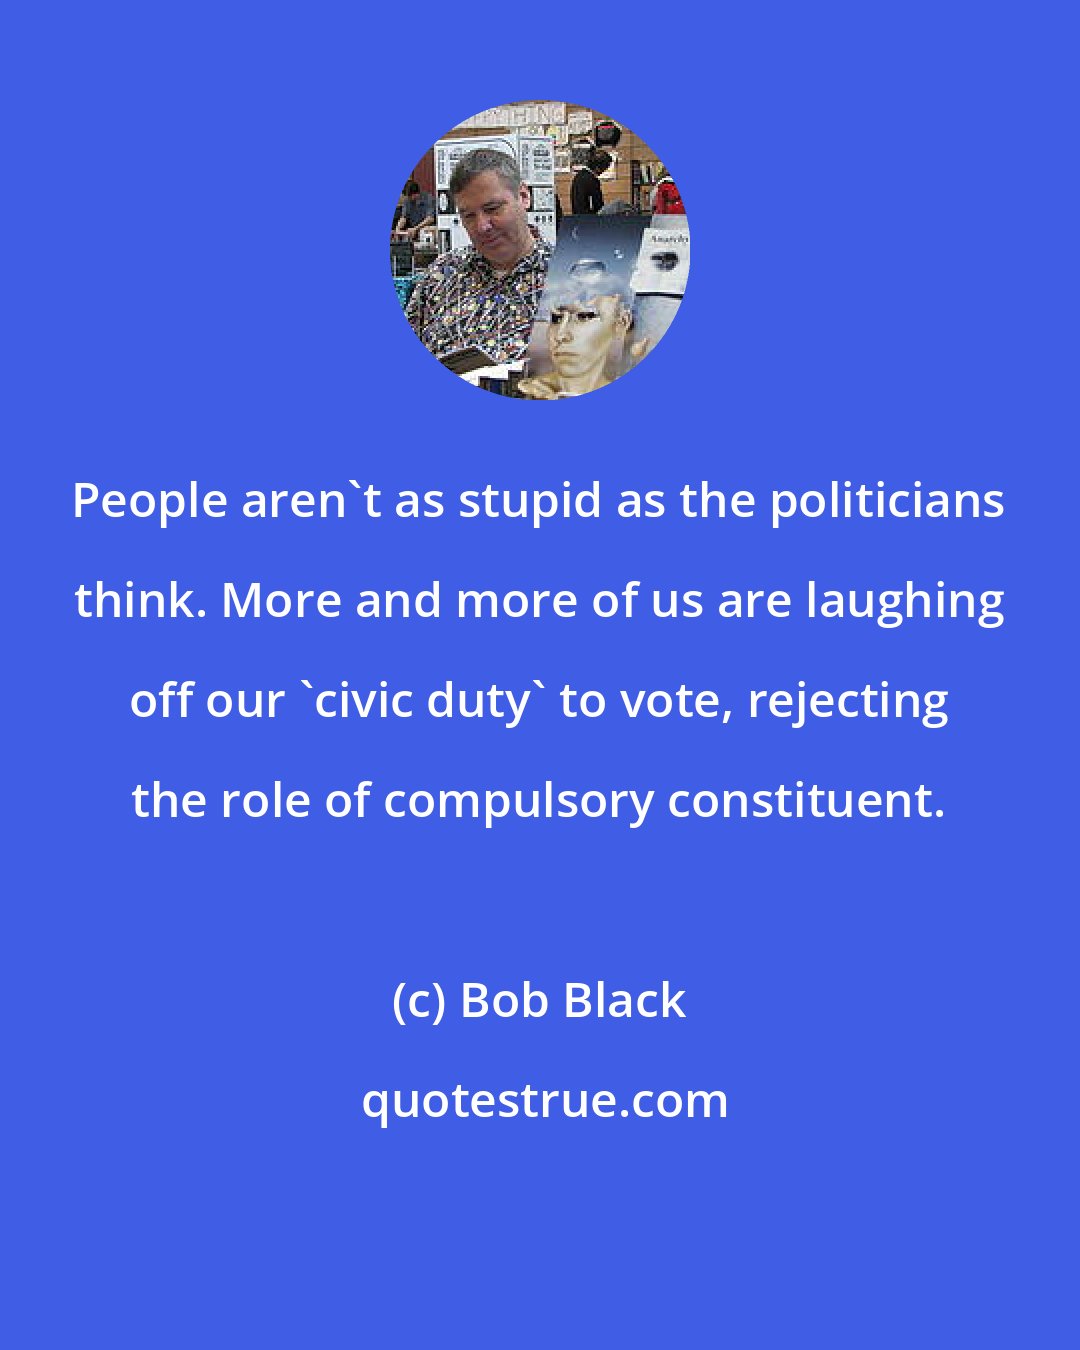 Bob Black: People aren't as stupid as the politicians think. More and more of us are laughing off our 'civic duty' to vote, rejecting the role of compulsory constituent.